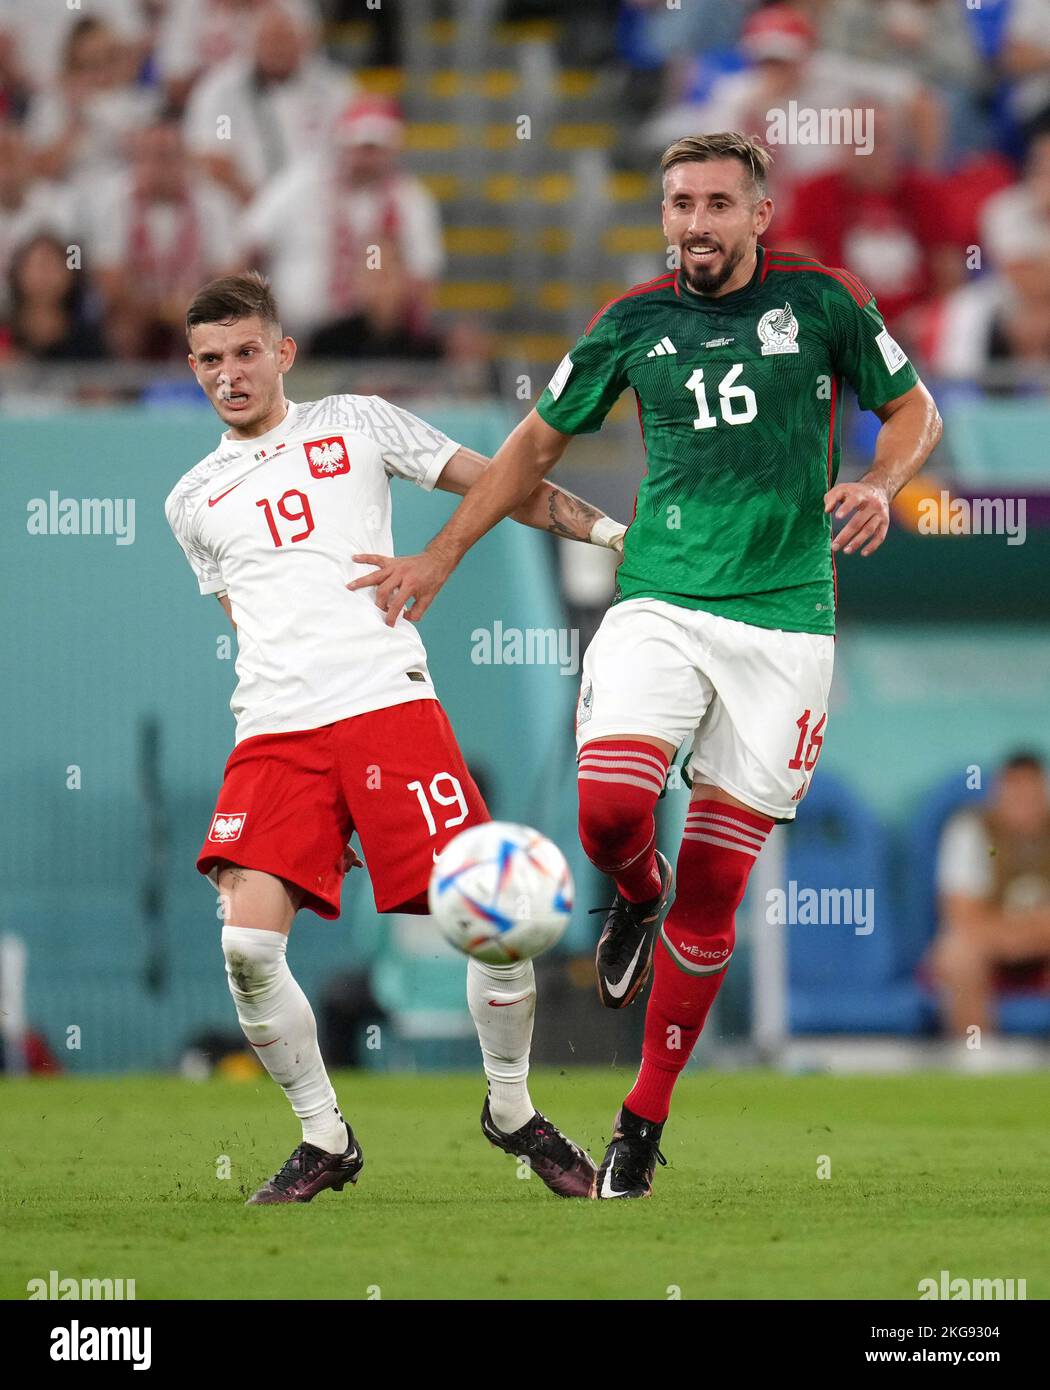 Poland's Sebastian Szymanski (left) and Mexico's Hector Herrera battle for the ball during the FIFA World Cup Group C match at Stadium 974, Rass Abou Aboud. Picture date: Tuesday November 22, 2022. Stock Photo